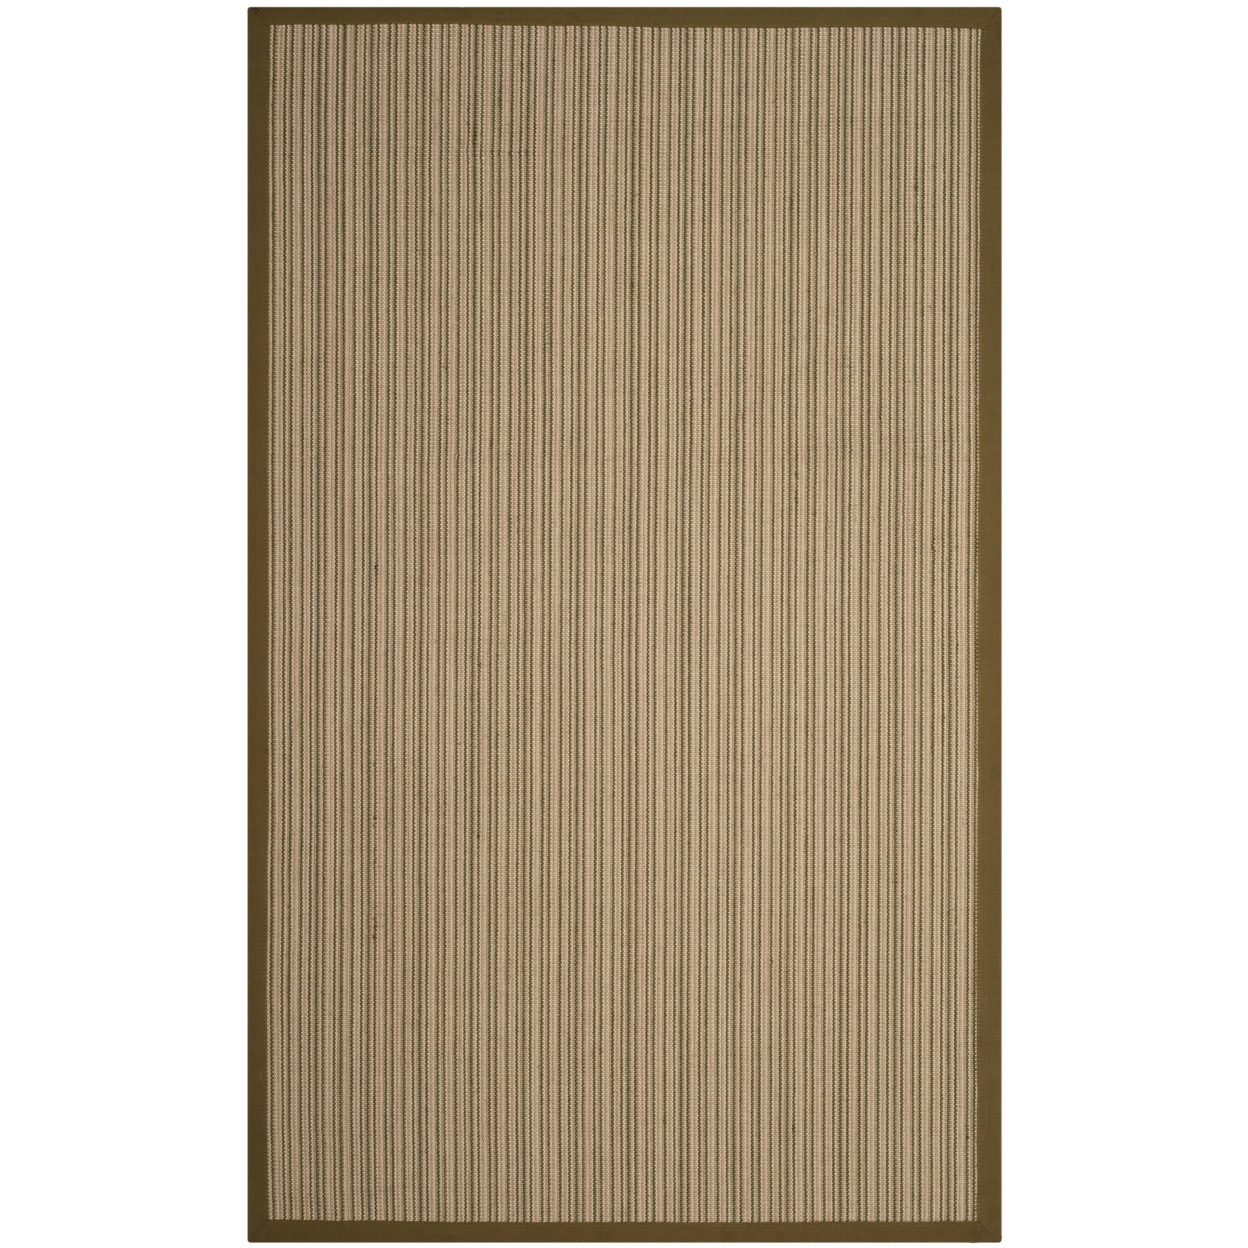 SAFAVIEH Natural Fiber Collection NF132A Multi/Green Rug - 5' X 8'